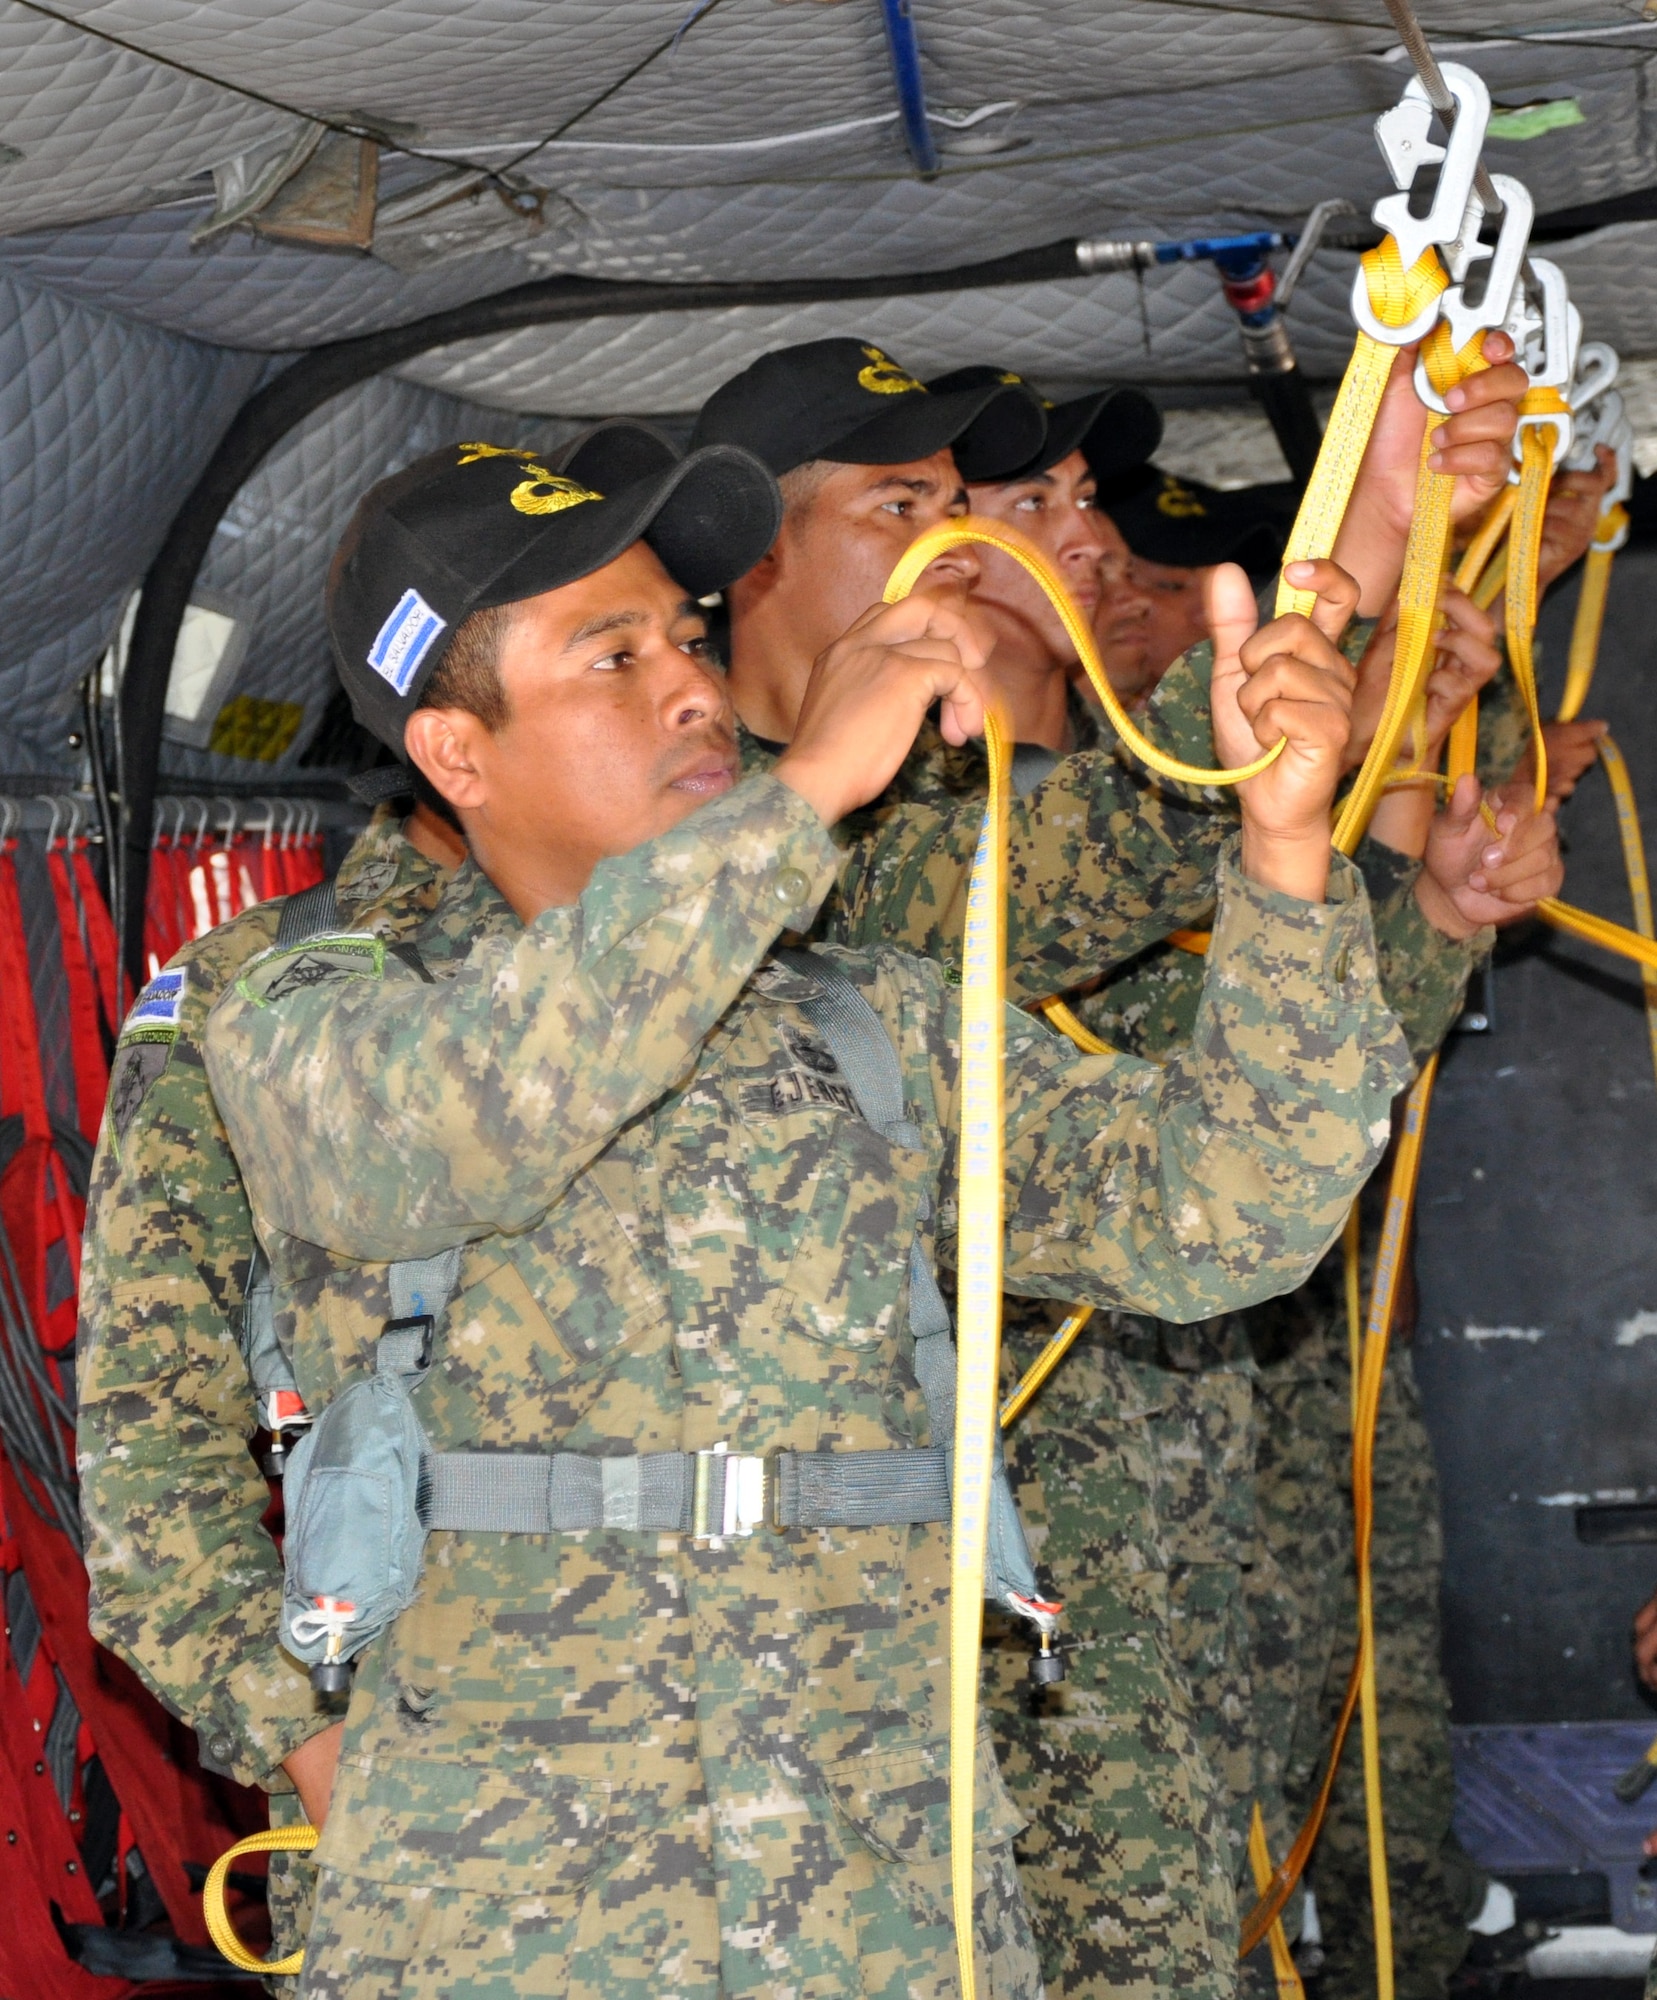 El Salvadoran military members rehearse to prepare to jump from the ramp of a CH-47 Chinook helicopter at an altitude of 1,250 feet during a joint airborne operations training exercise conducted by U.S. Special Forces and El Salvadoran servicemembers over Lake Ilopango, El Salvador, Jan. 21, 2014.  U.S. Special Forces from the 7th Special Forces Group (Airborne) conducted the training exercise alongside members of the El Salvadoran military.  The joint-training, overwater static jump allowed members from both nations to maintain currency while strengthening the relationship between the U.S. and El Salvadoran forces.  Joint Task Force-Bravo’s 1-228th Aviation Regiment provided aerial support for the exercise, flying each chalk of jumpers from the Ilopango International Airport to the drop zone over Lake Ilopango.  (U.S. Air Force photo by Capt. Zach Anderson)